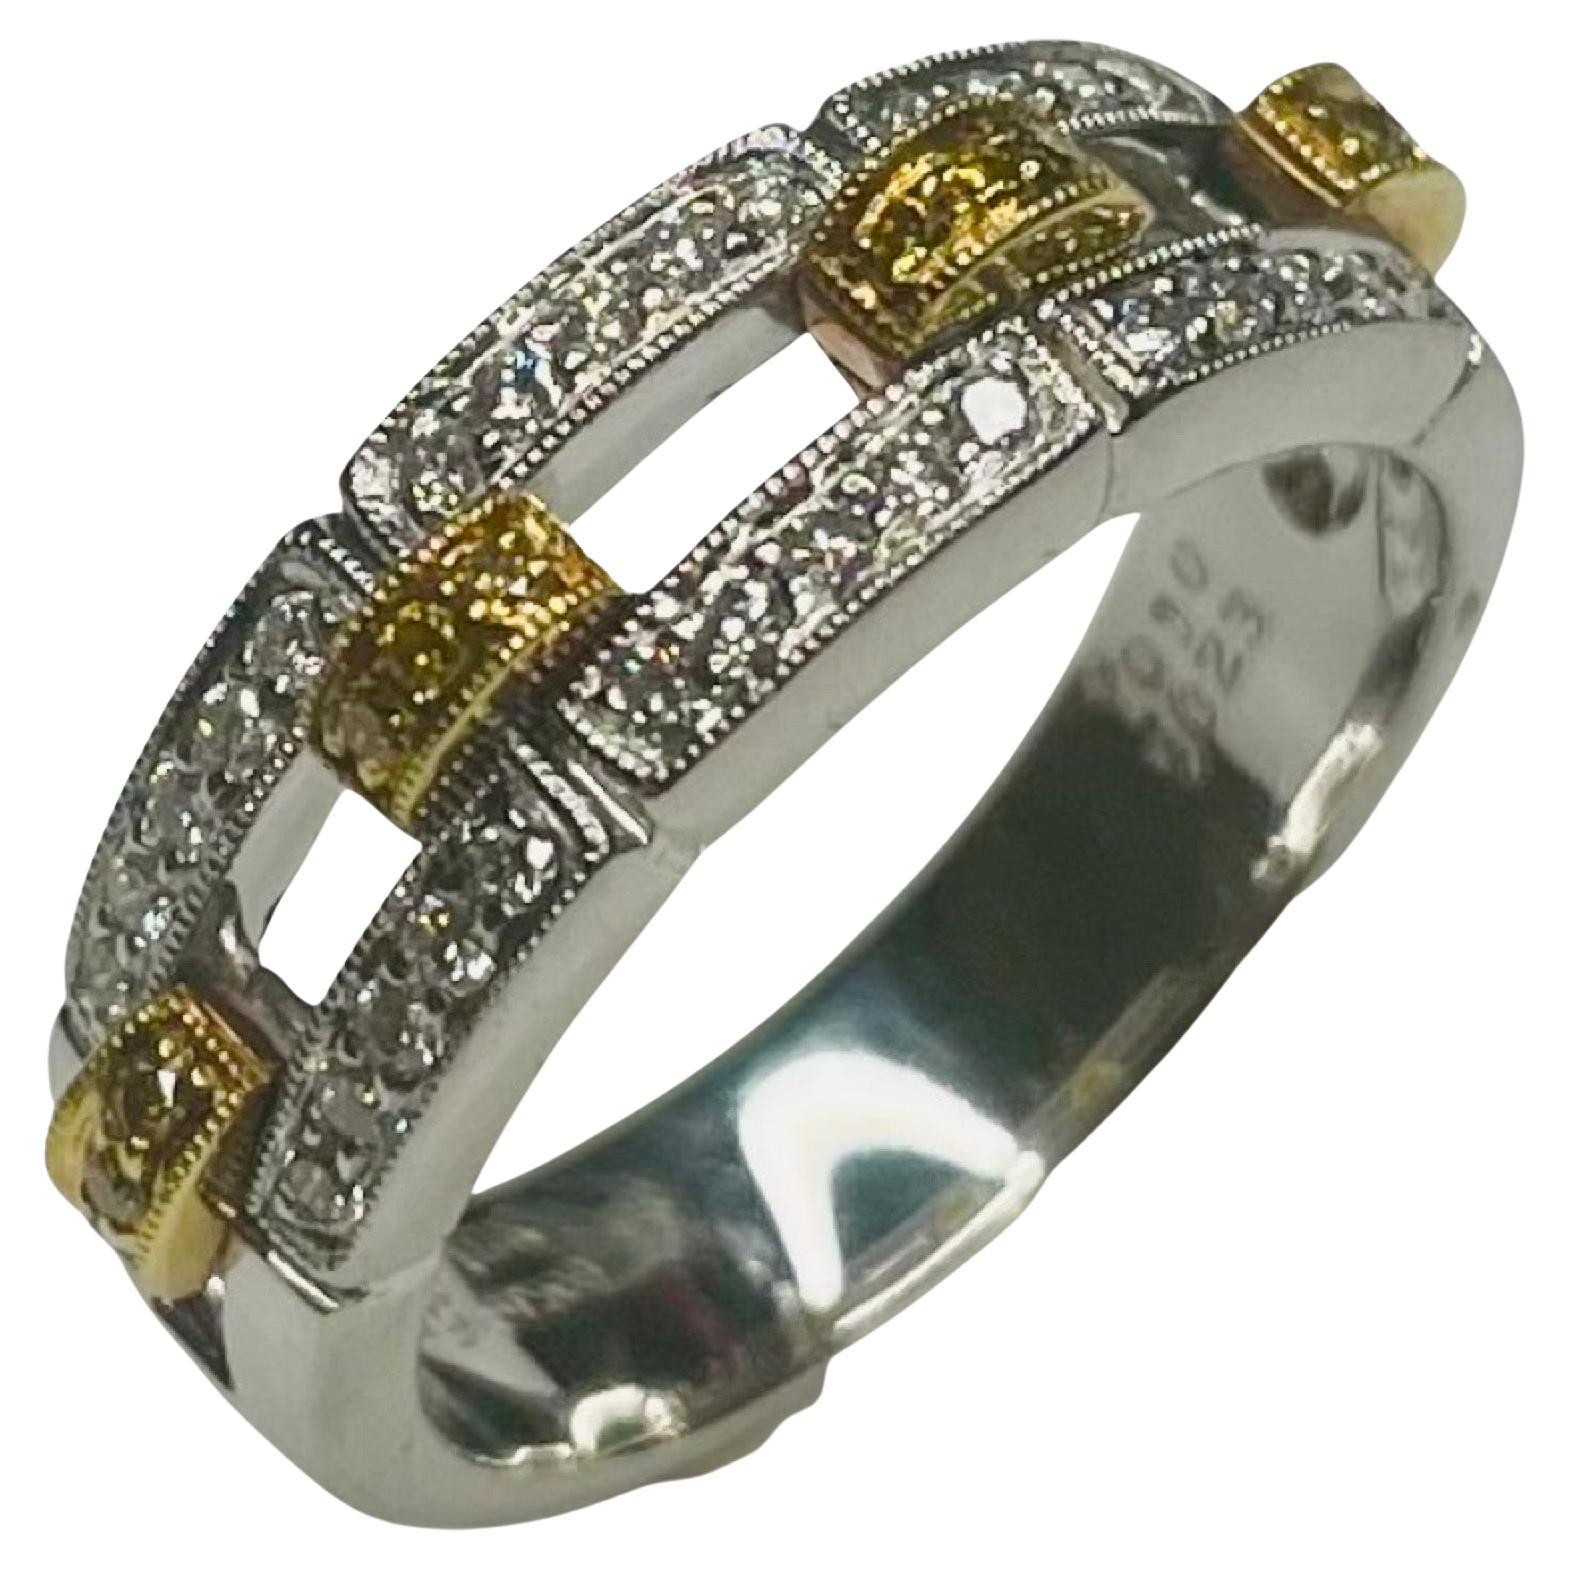 Simon G 18K Yellow Gold and Platinum Natural Yellow and White Diamond Band. This band has 30 full cut round brilliant diamonds of VS clarity and G color. There is a total white diamond weight of 0.23 carats. There are 12 fancy intense yellow